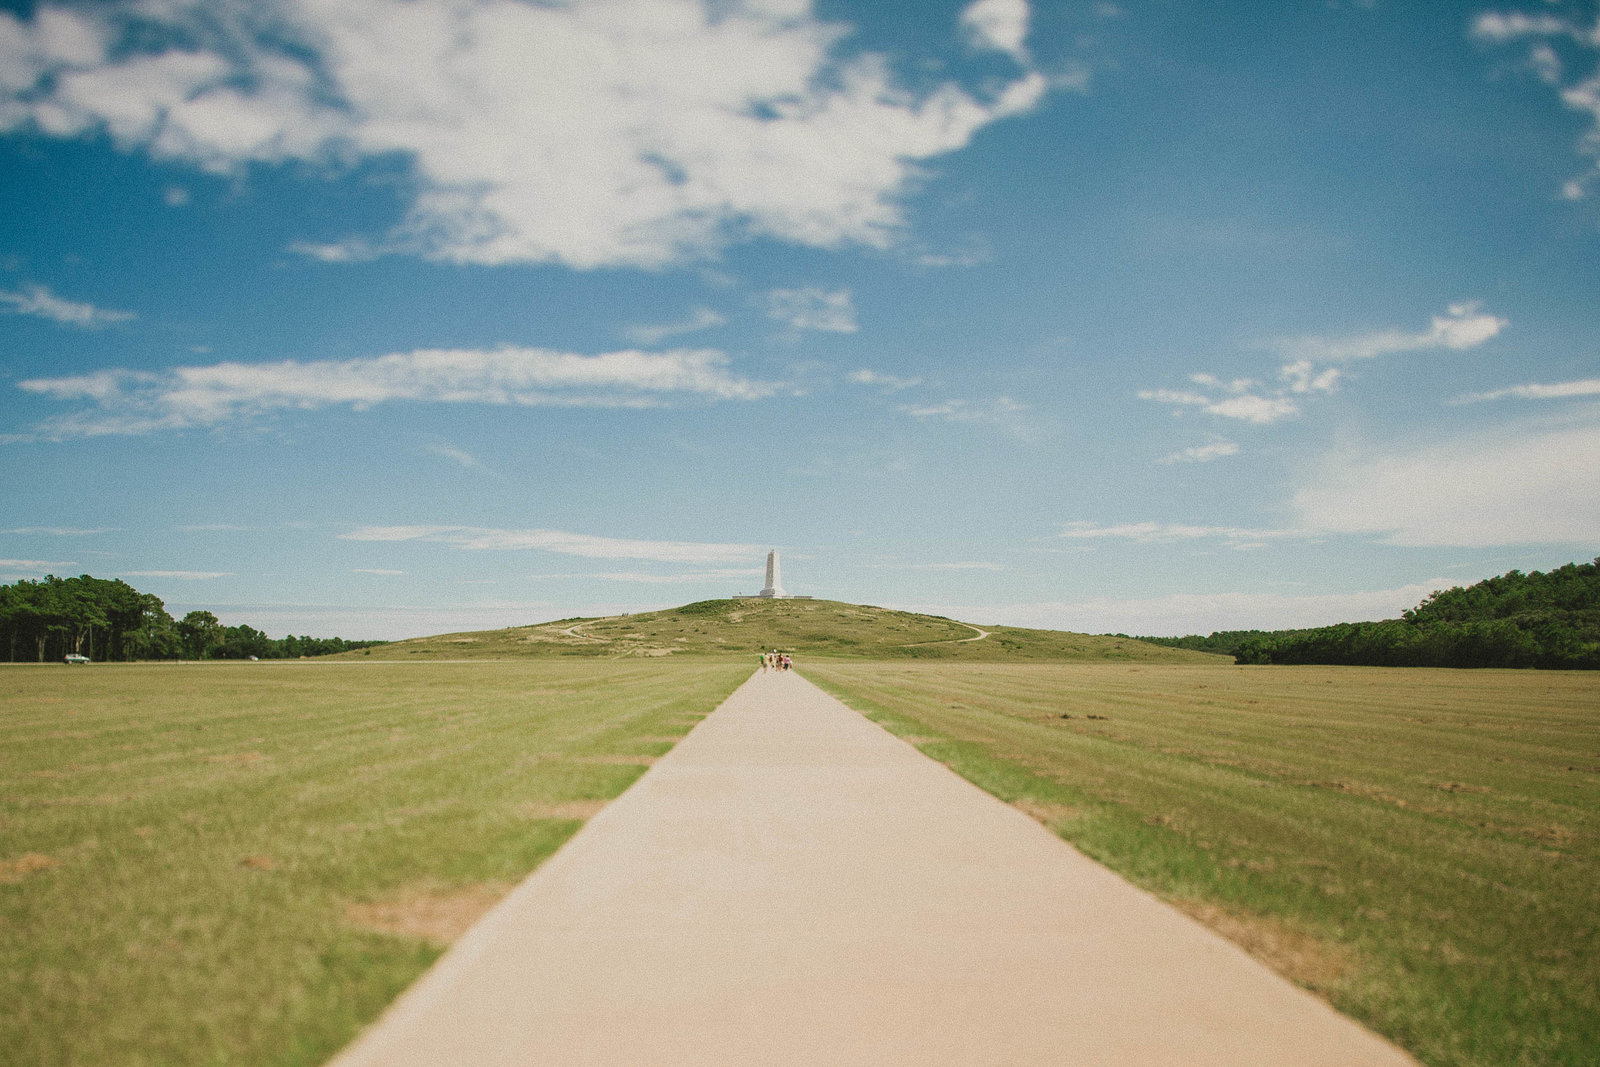 historic-field-wright-brothers-national-memorial-nc-kate-timbers-photography-1617